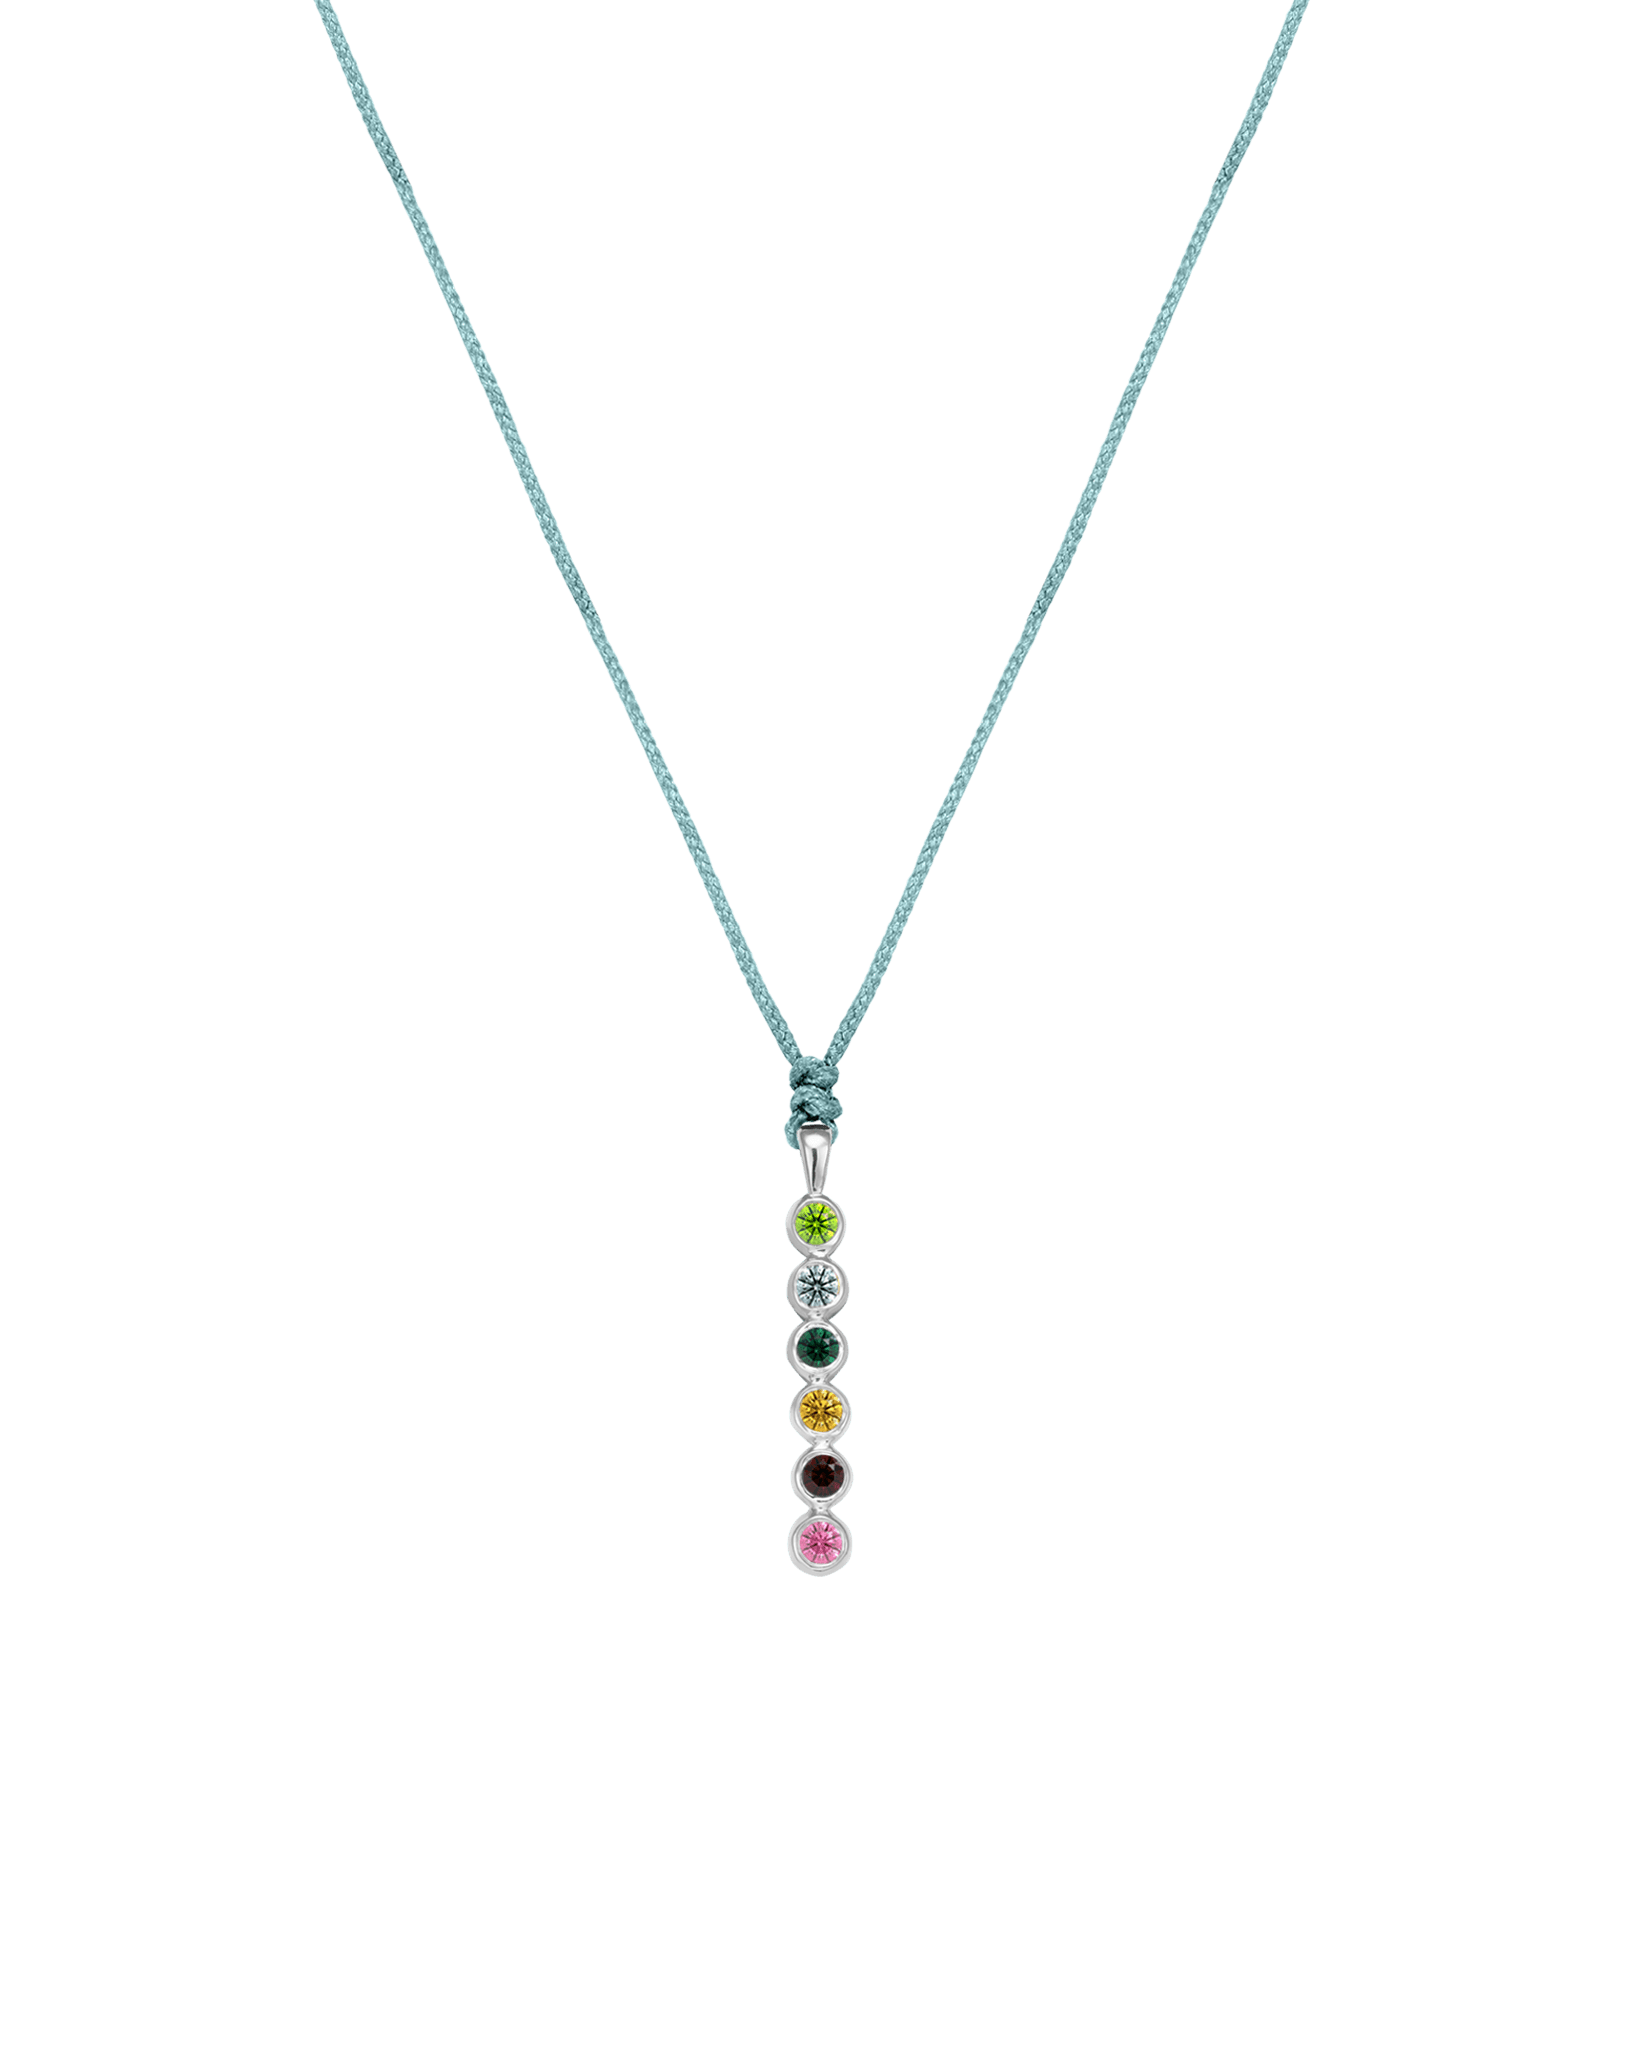 The Birthstones Bar Necklace - 14K White Gold Necklaces 14K Solid Gold Turquoise 2 